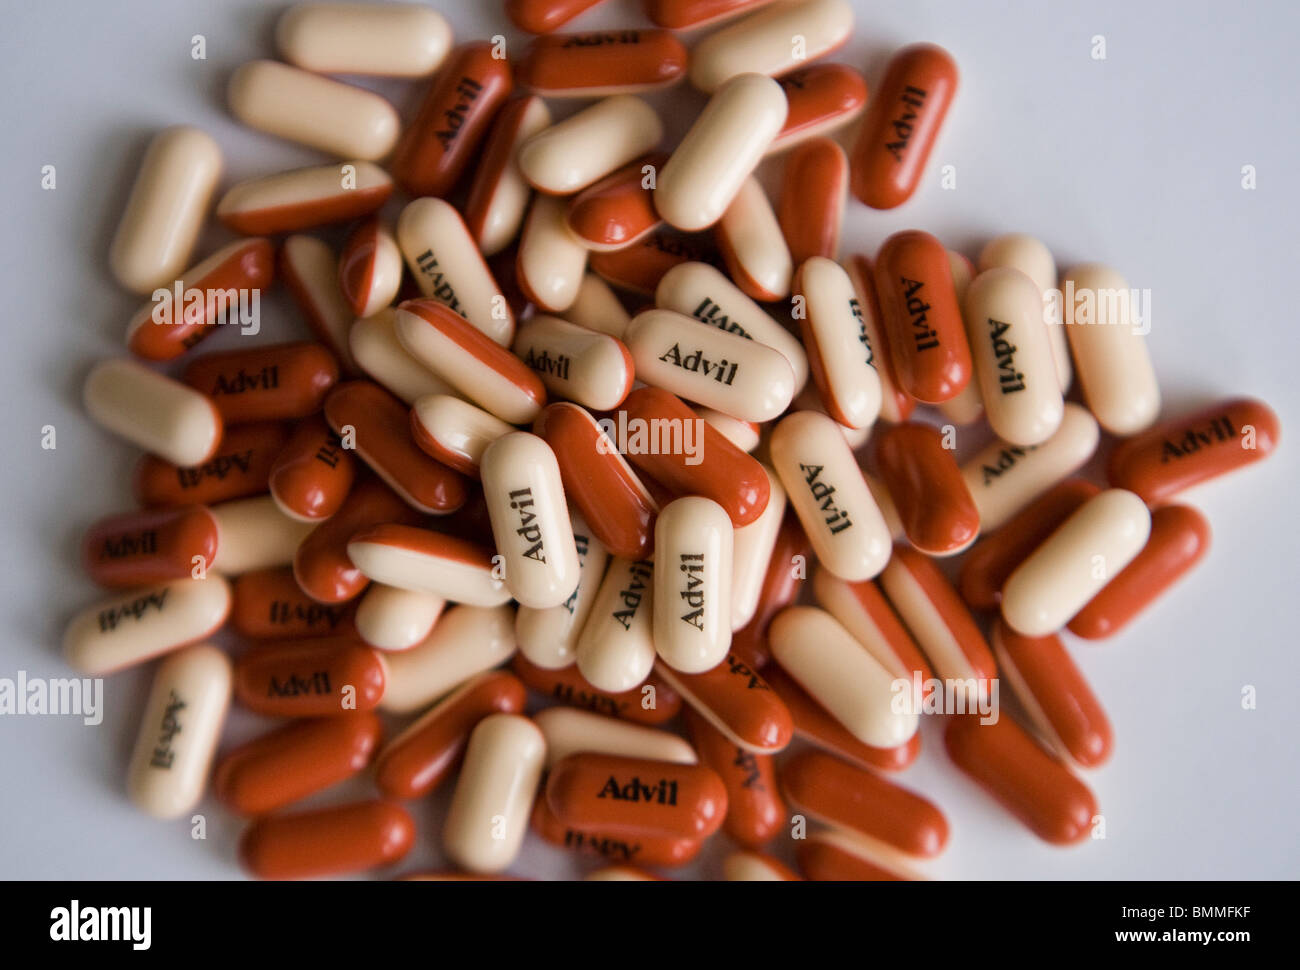 Ibuprofen packaging and pills.  Stock Photo